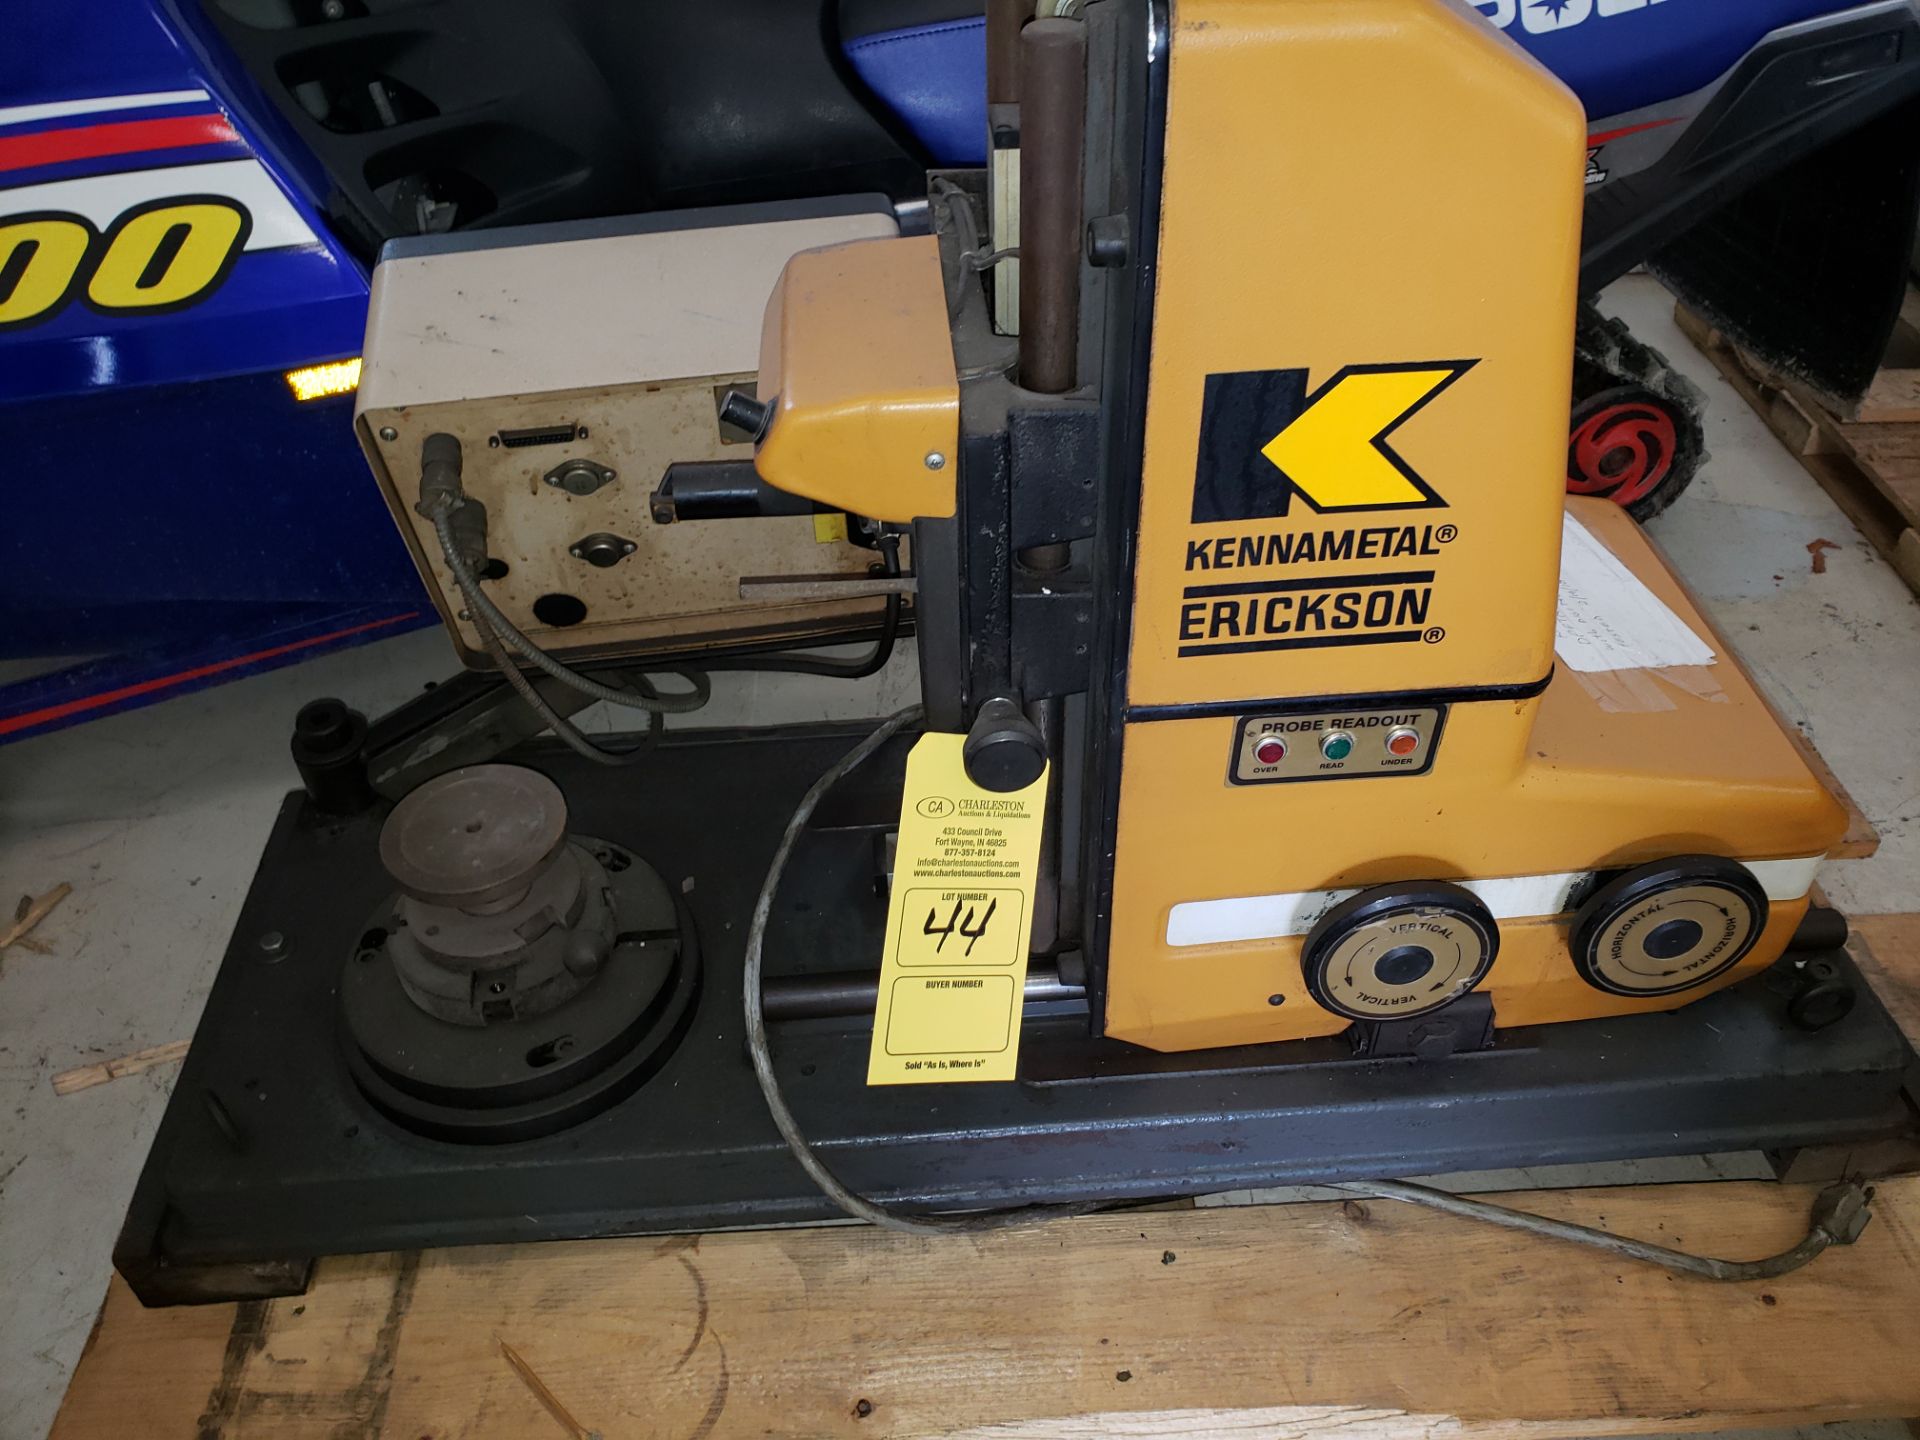 KENNAMETAL/ERICKSON TOOL SETTER MODEL-DPFTR511216 W/ DIGITAL READ OUT (LOCATED AT 432 COUNCIL